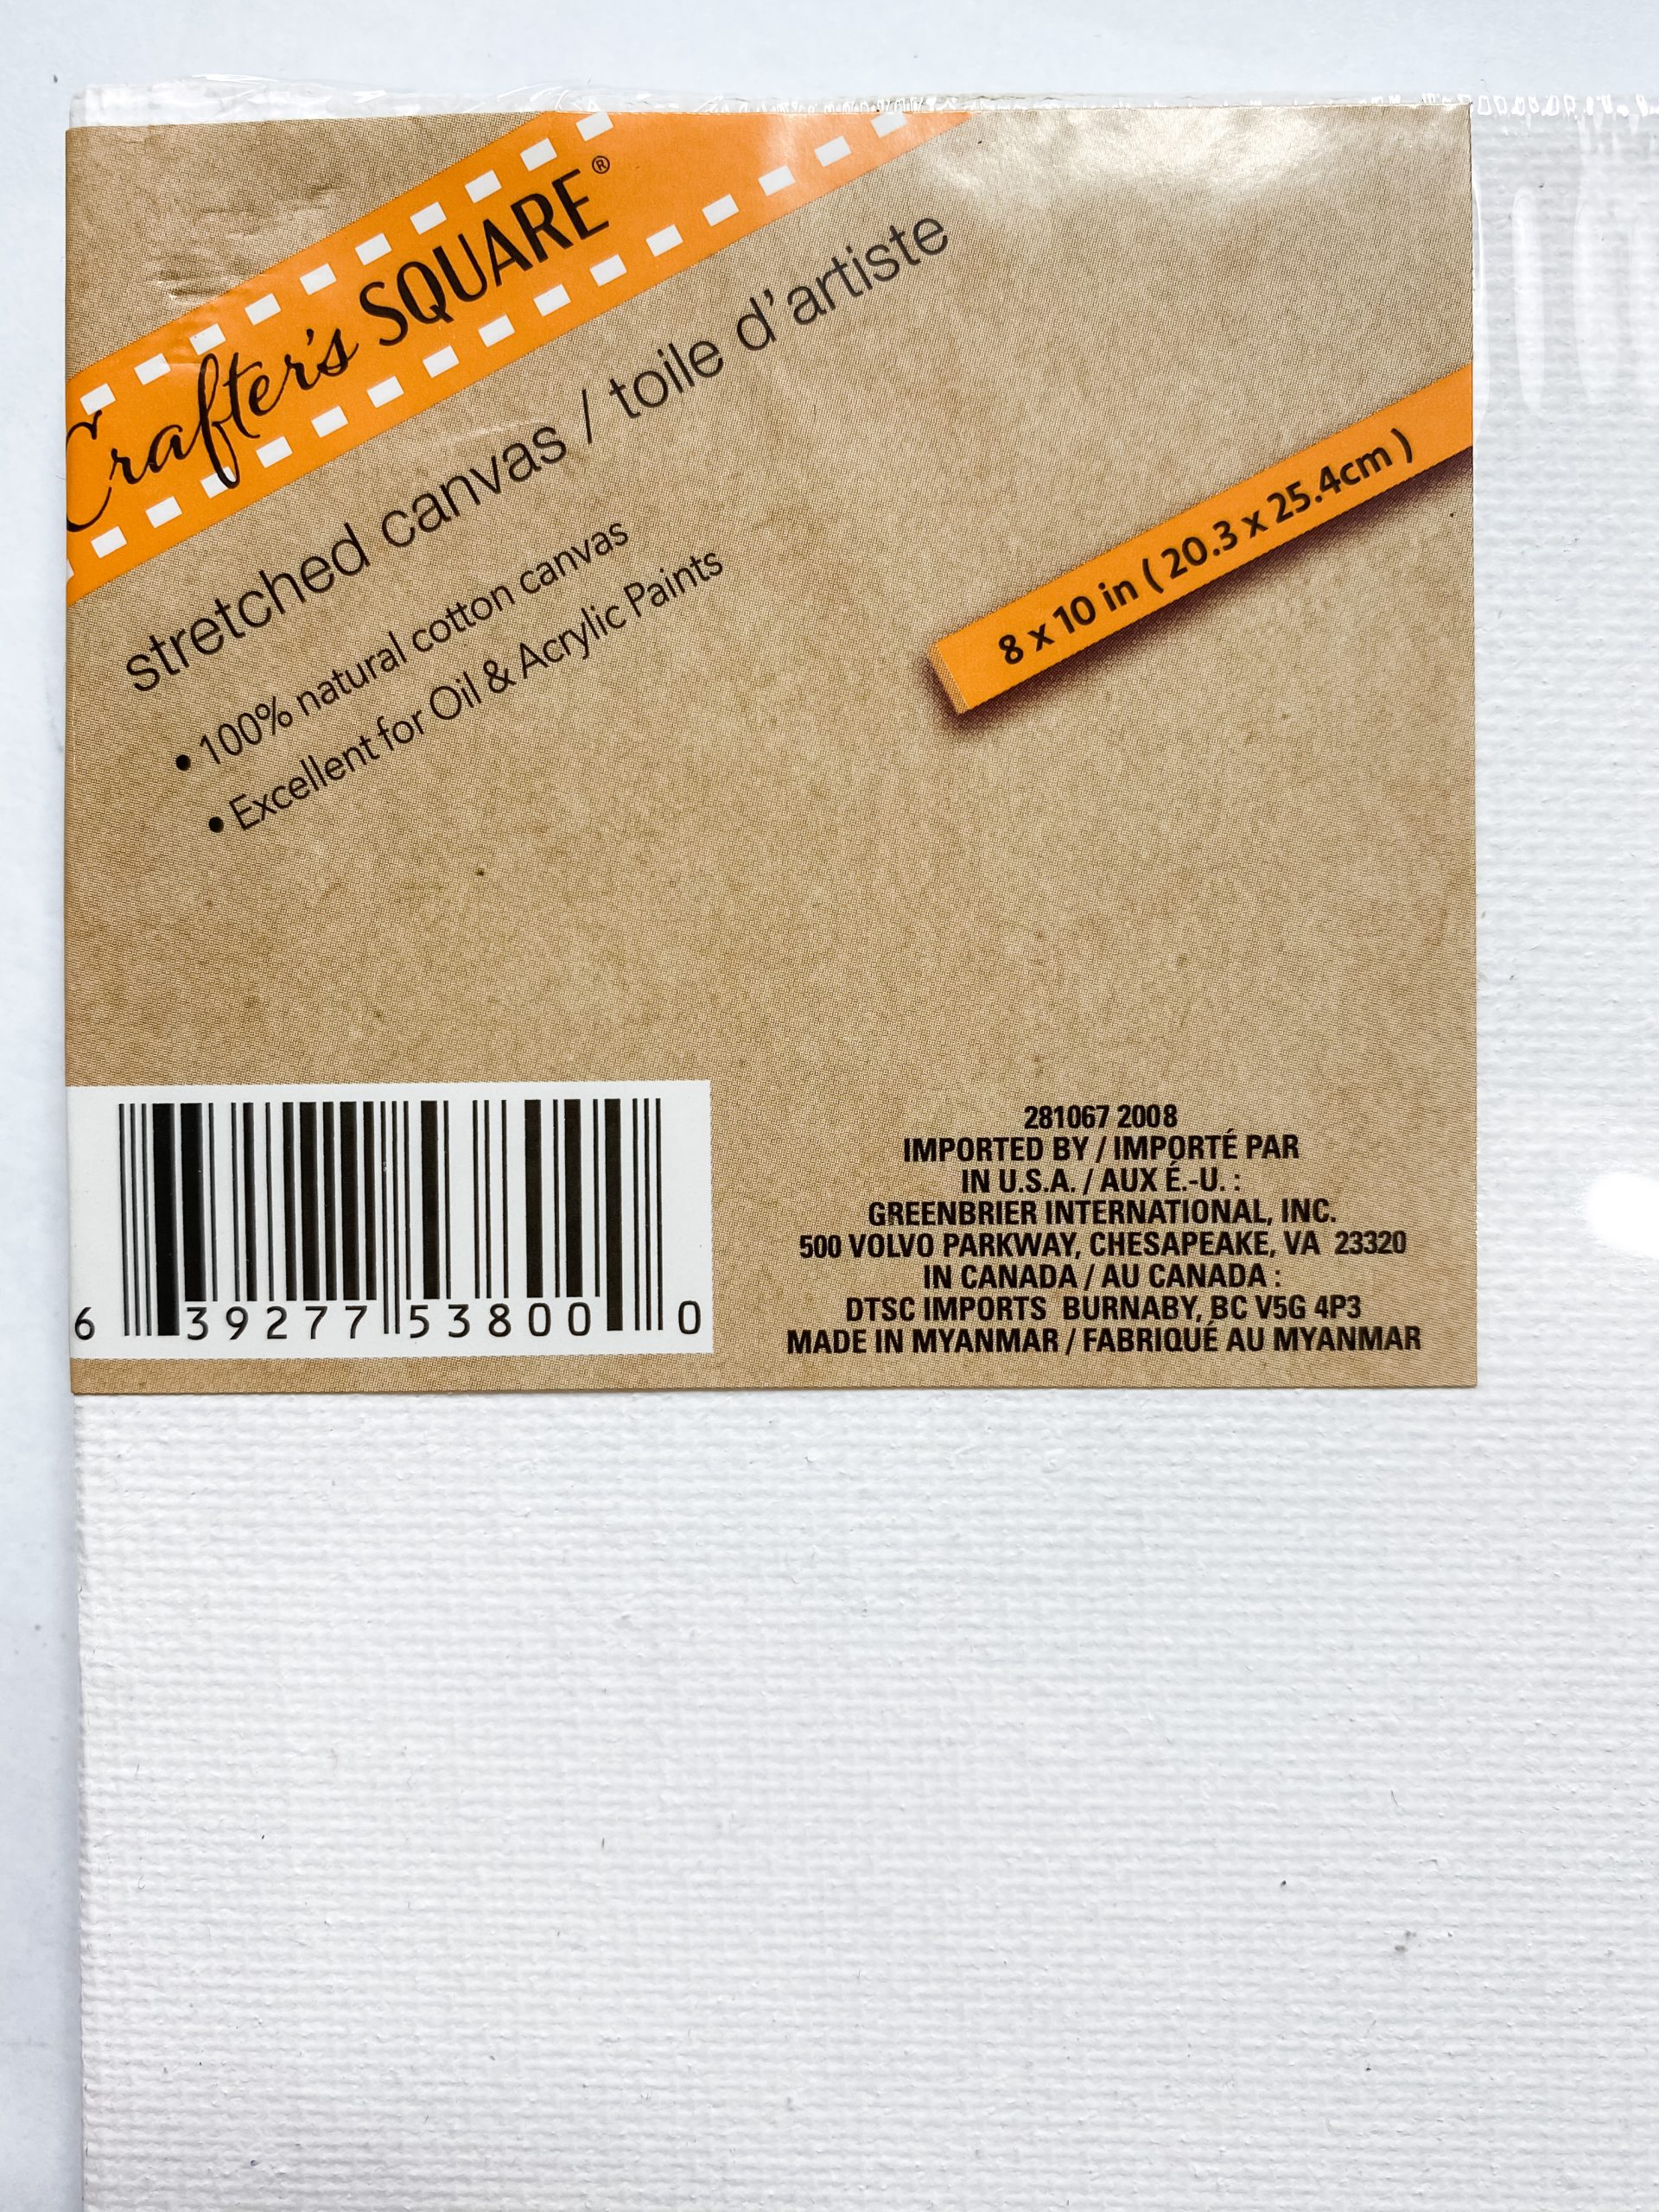 Crafter's Square White Stretched Canvases, 4 x 6 at Dollar Tree